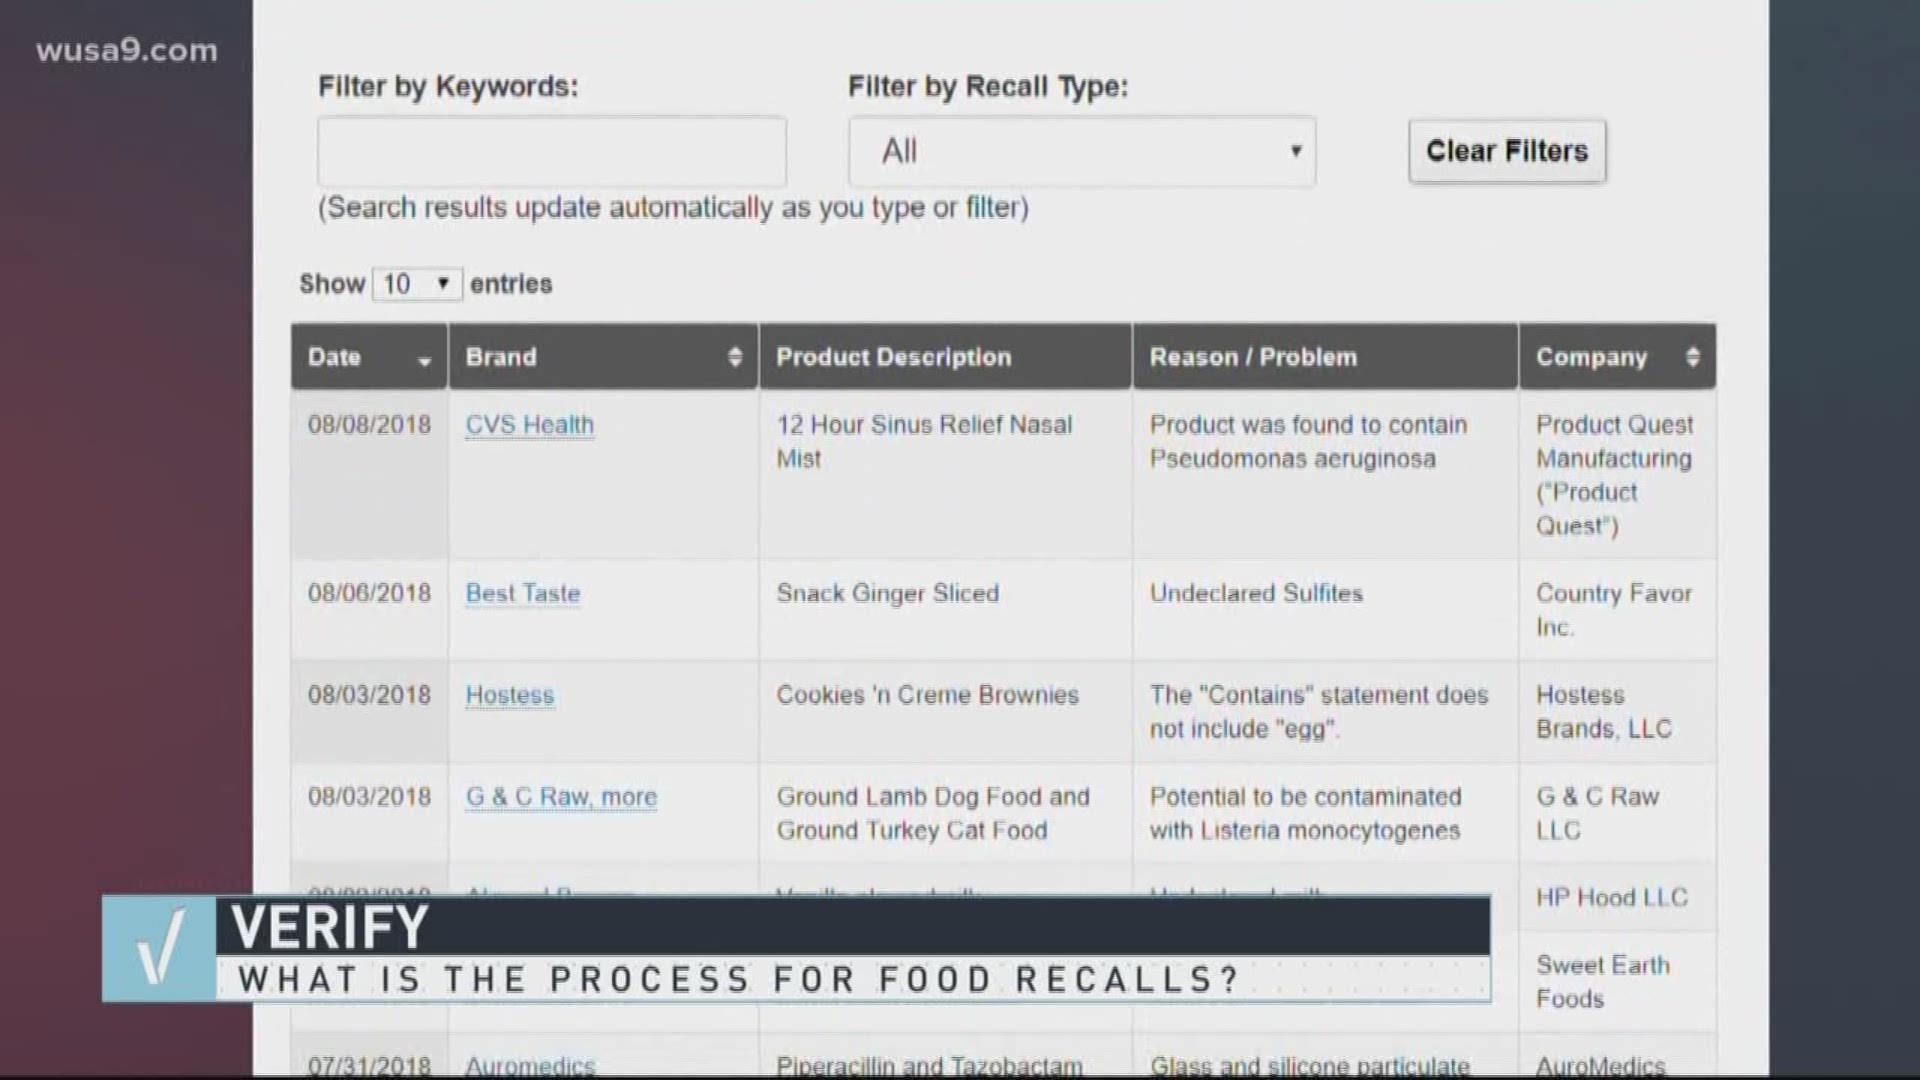 Here's a breakdown of the process to recalling food.